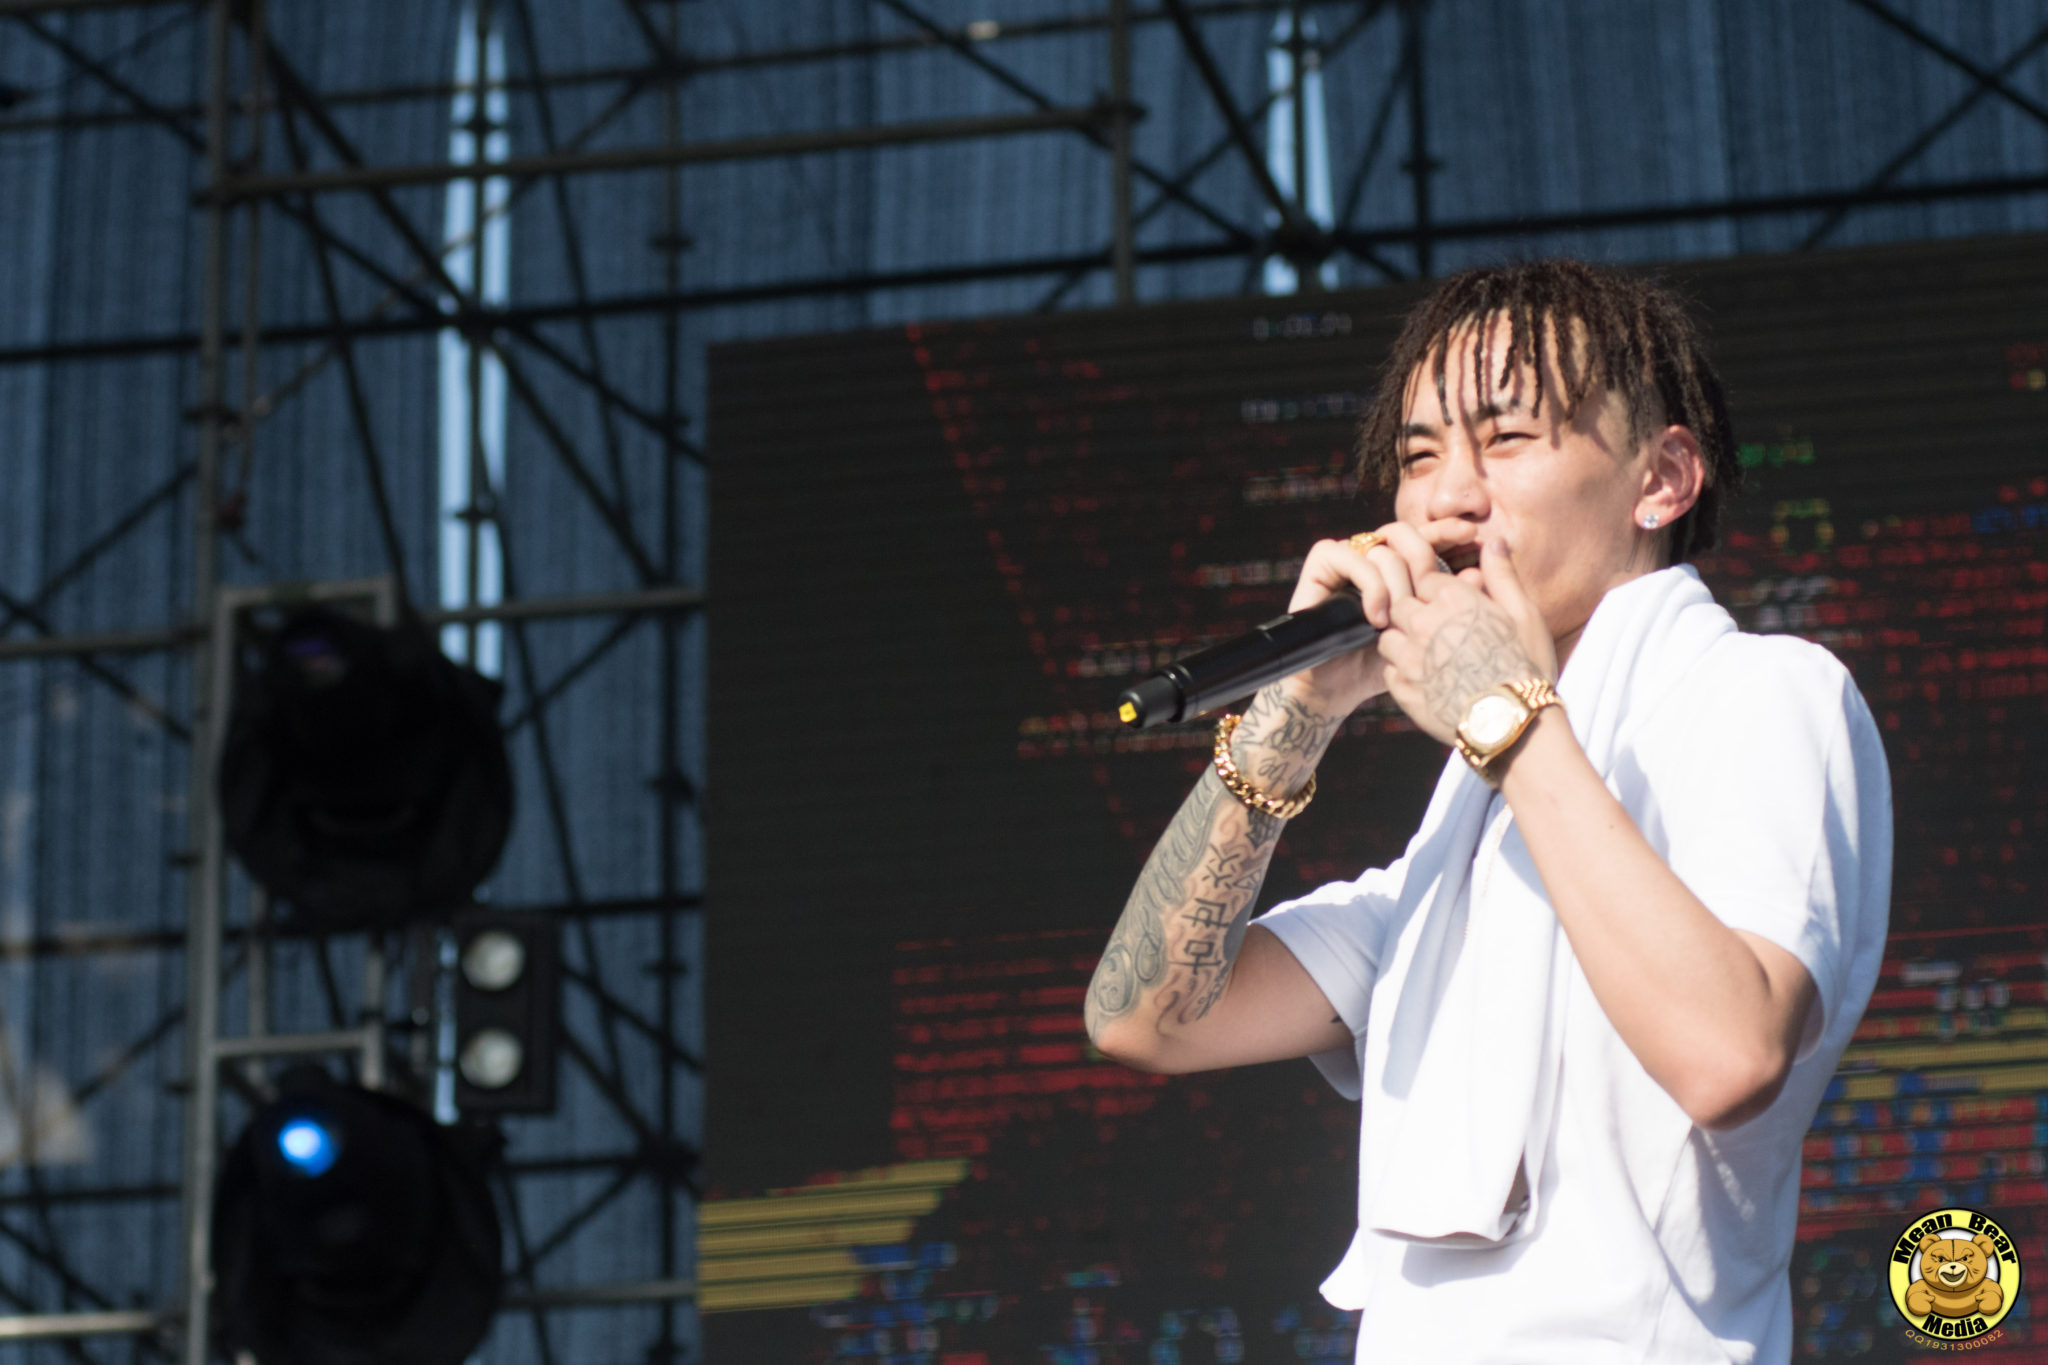 D5H_0381-400x284 Higher Brothers